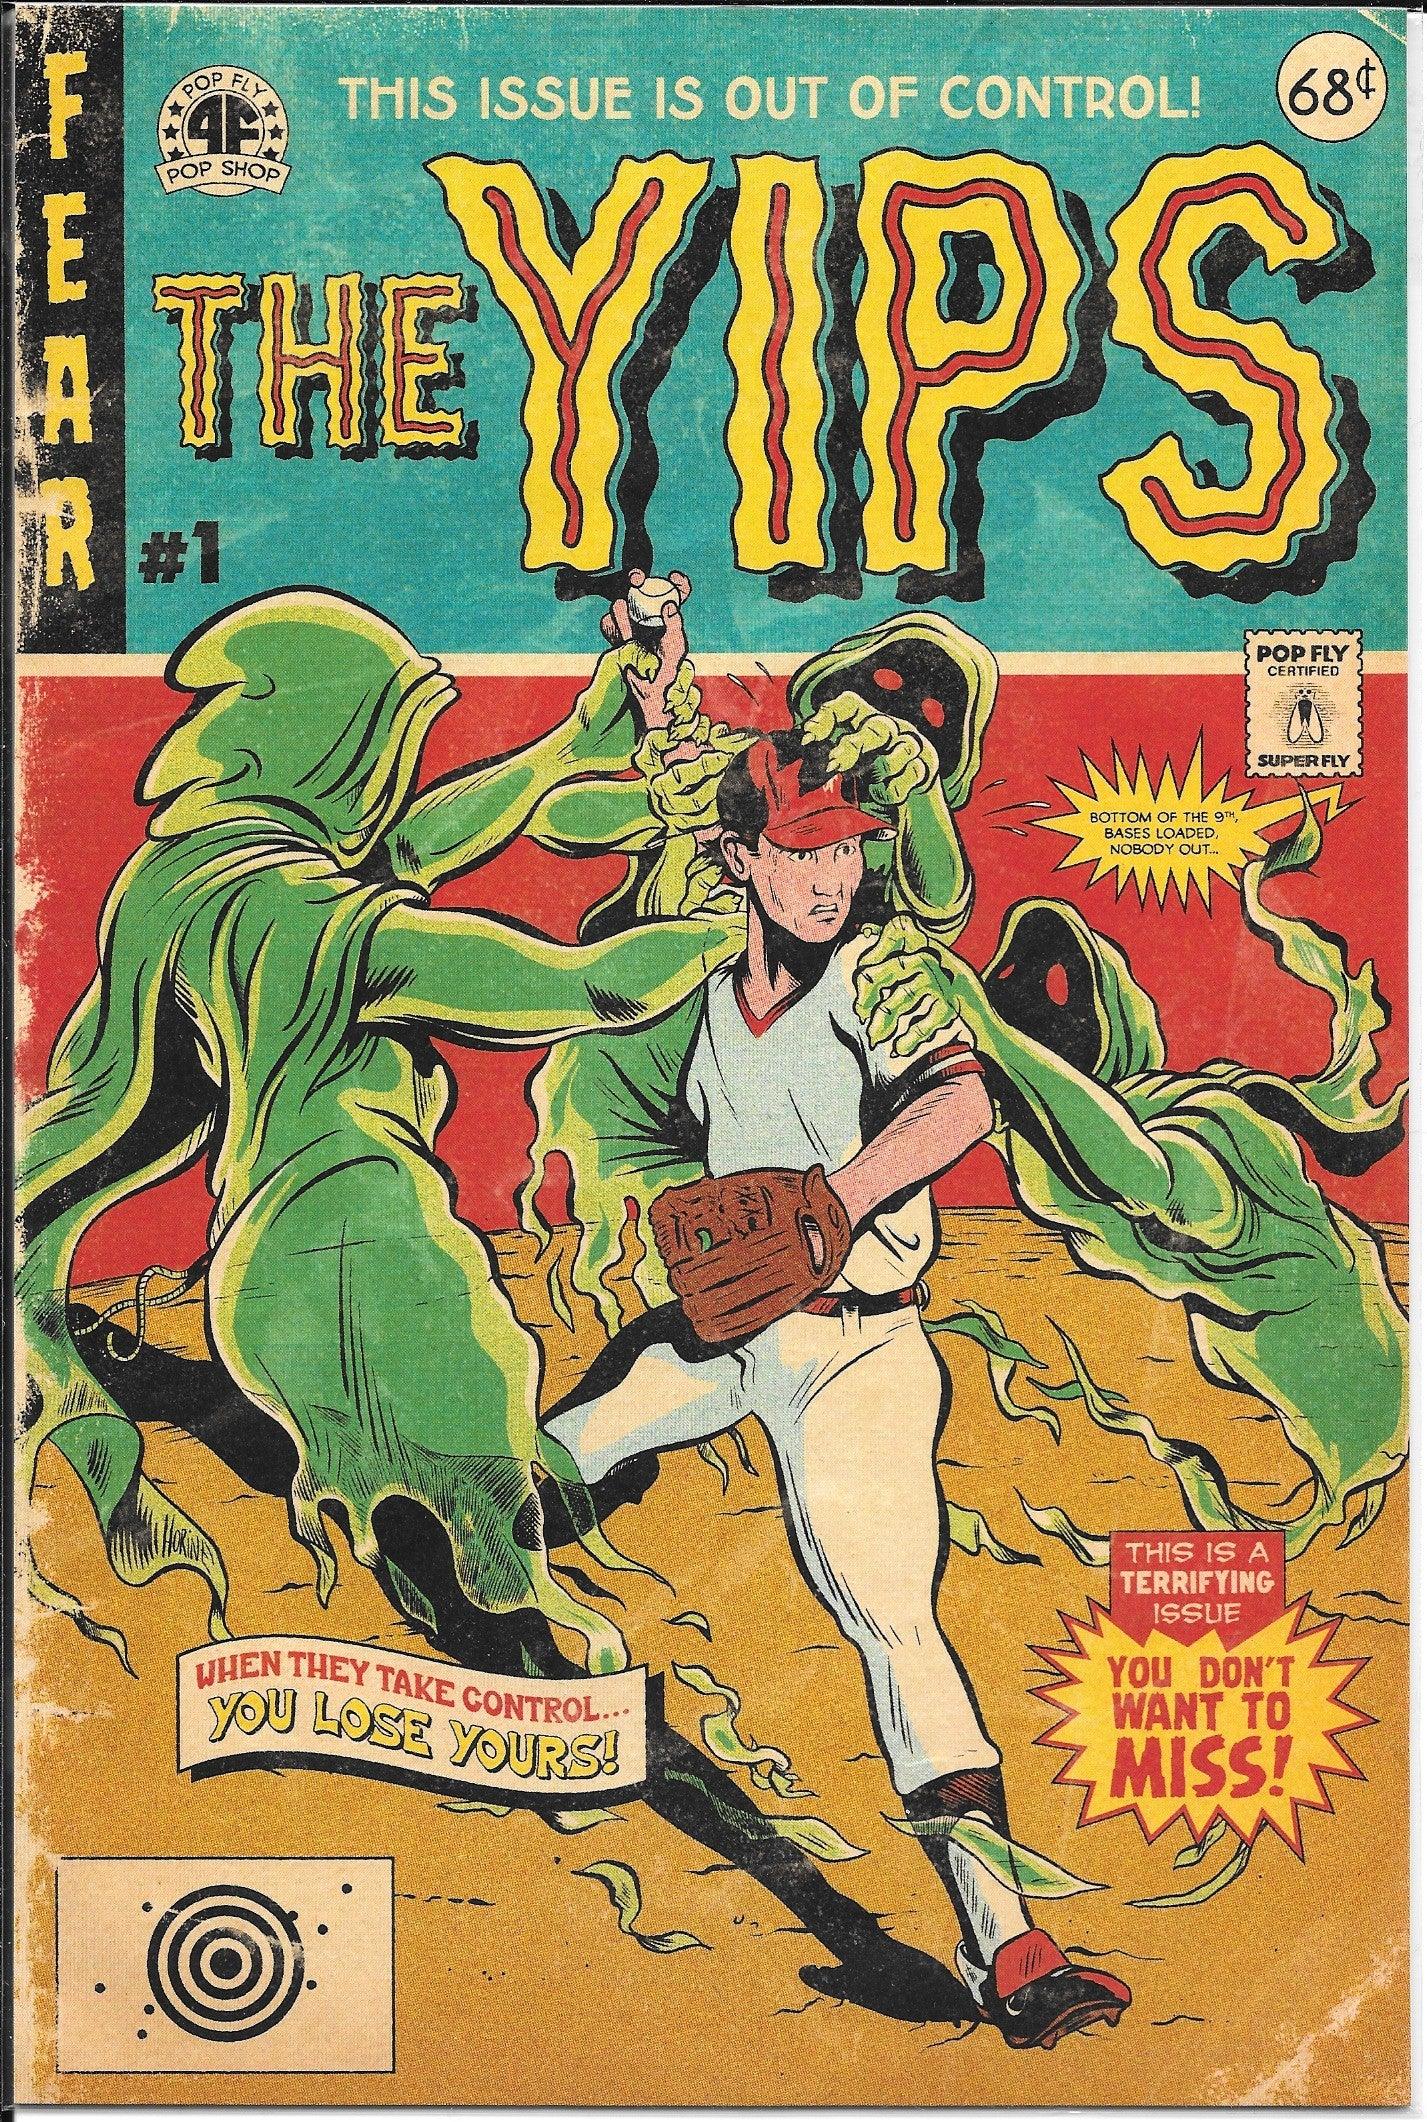 "The Yips" Pop Fly Pop Shop Print #68 – Signed by Daniel Jacob Horine - PastPros